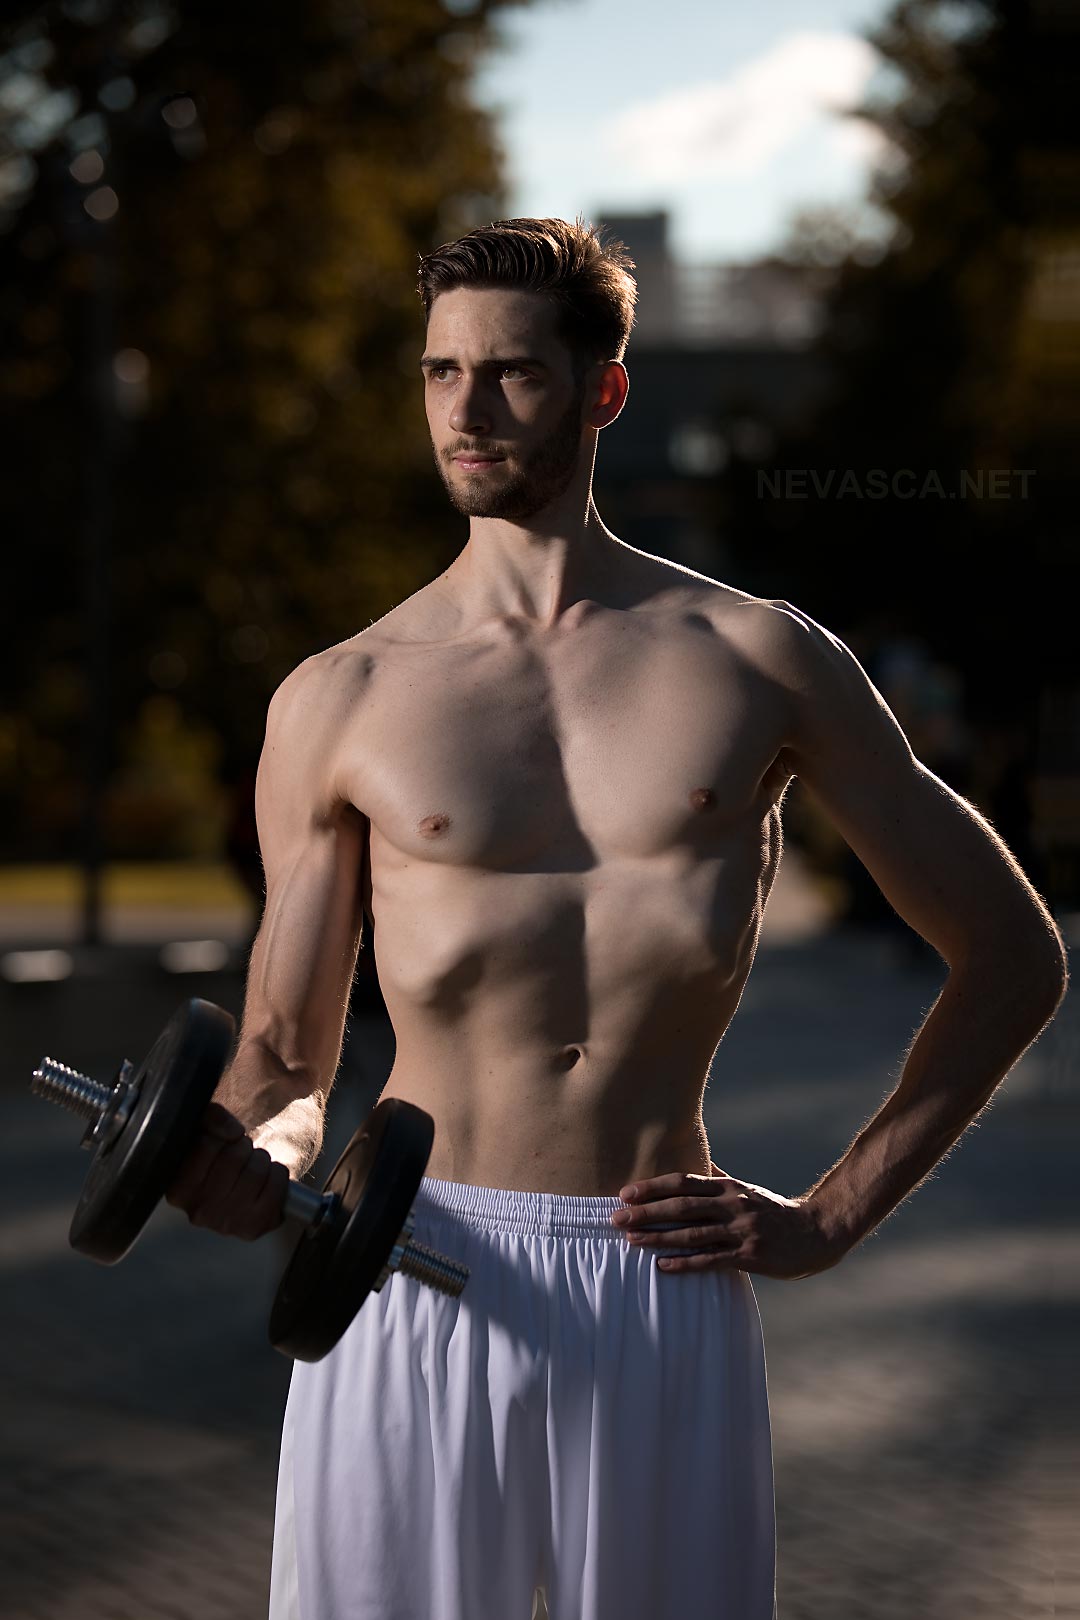 A young man standing in a park is holding a dumbbell.